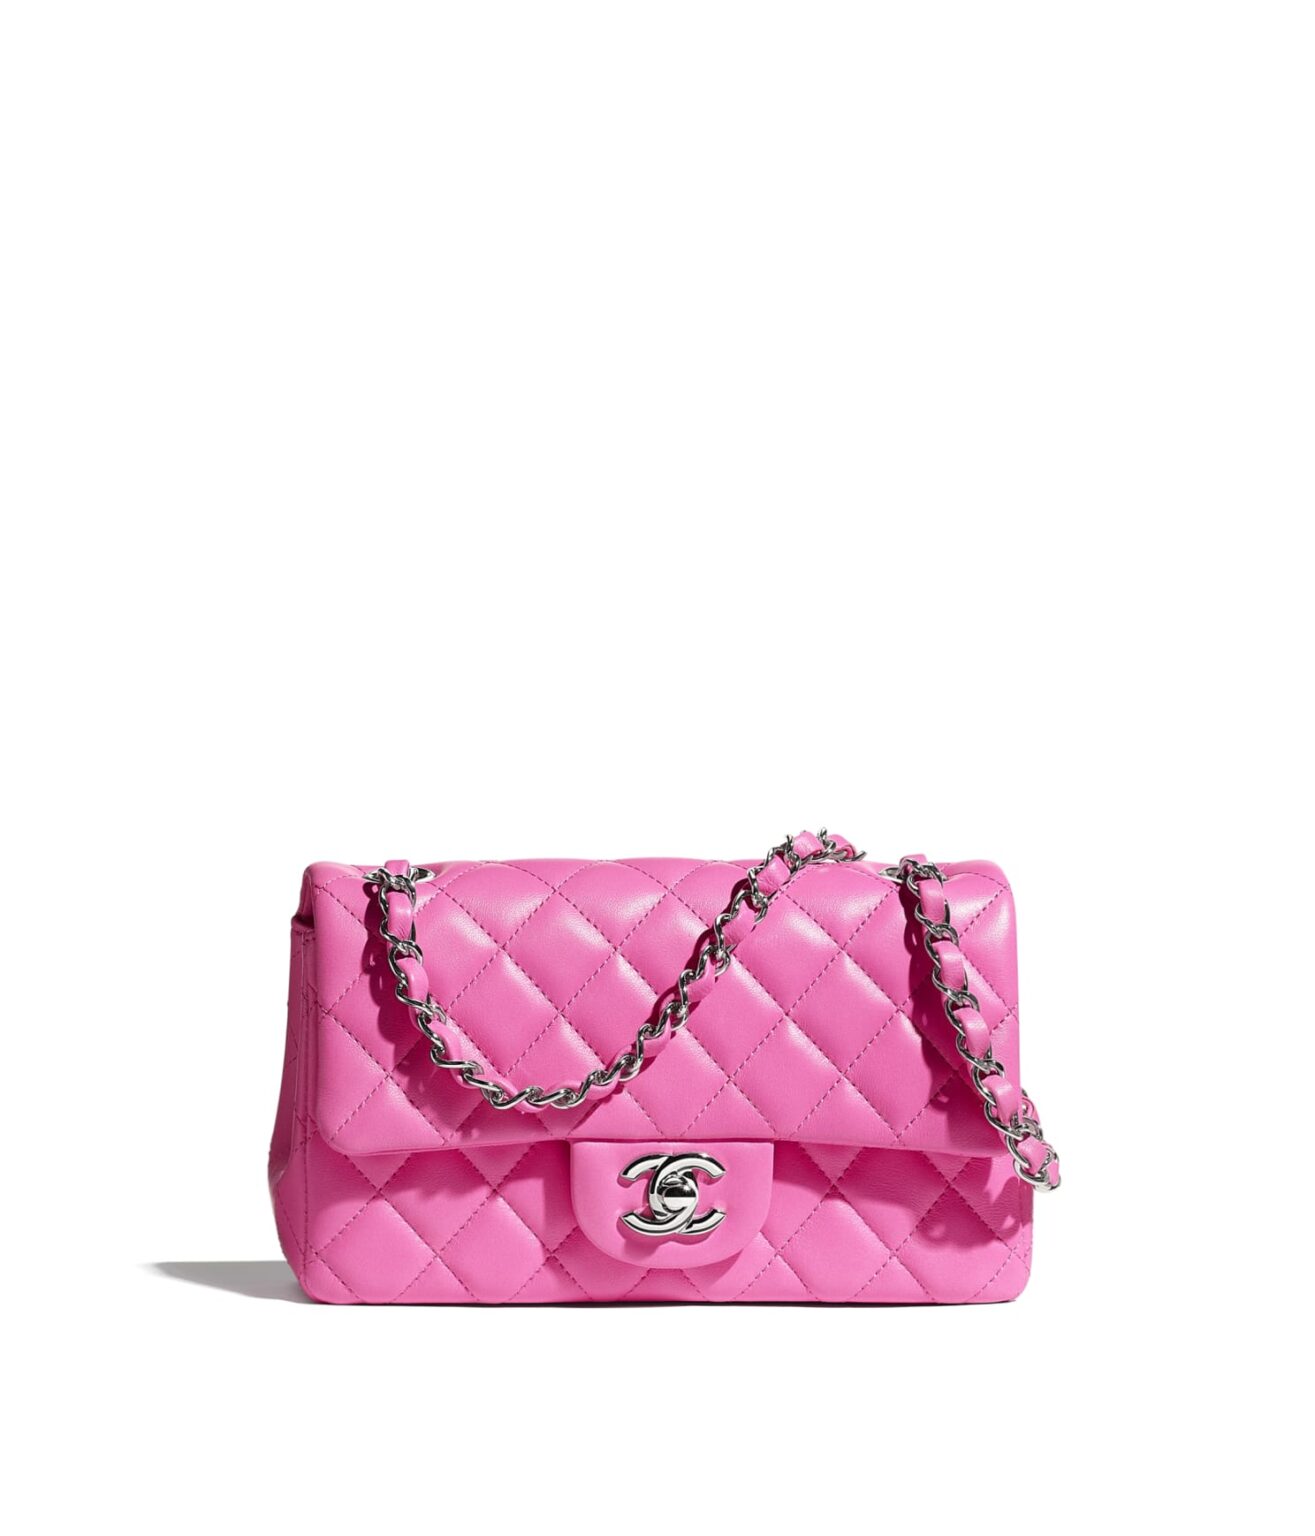 The Chanel Classic Flap Bag - True Iconic Bag or Overhyped? - Designer ...